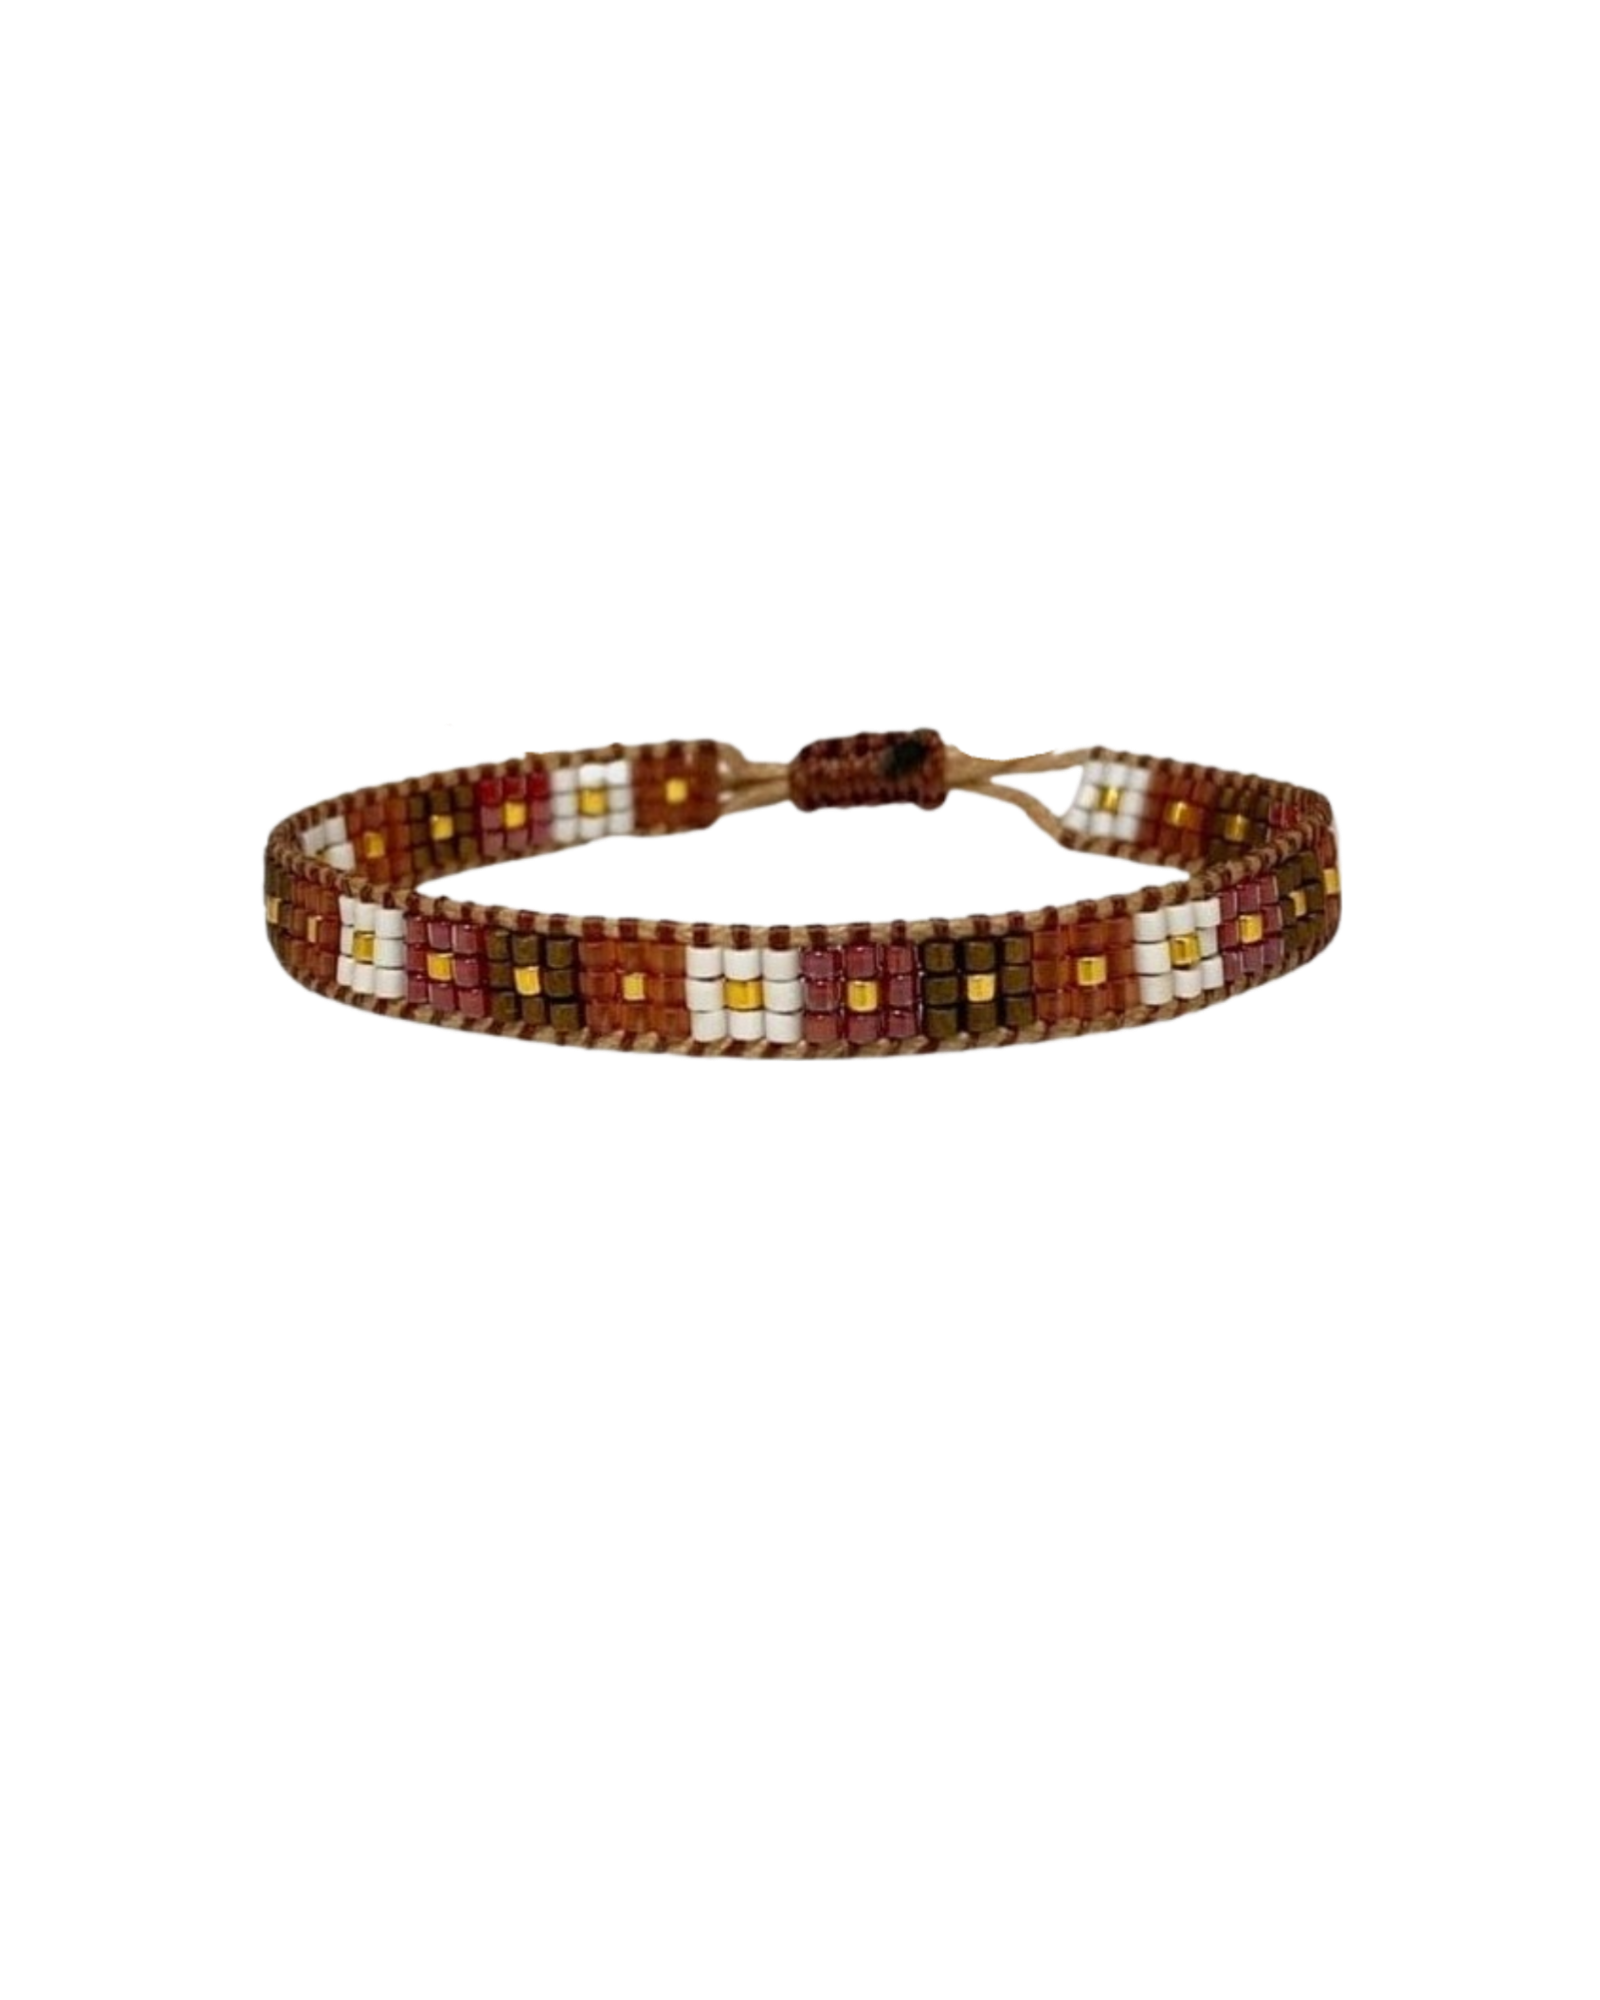 beaded-bracelet with checkered design in brown colors